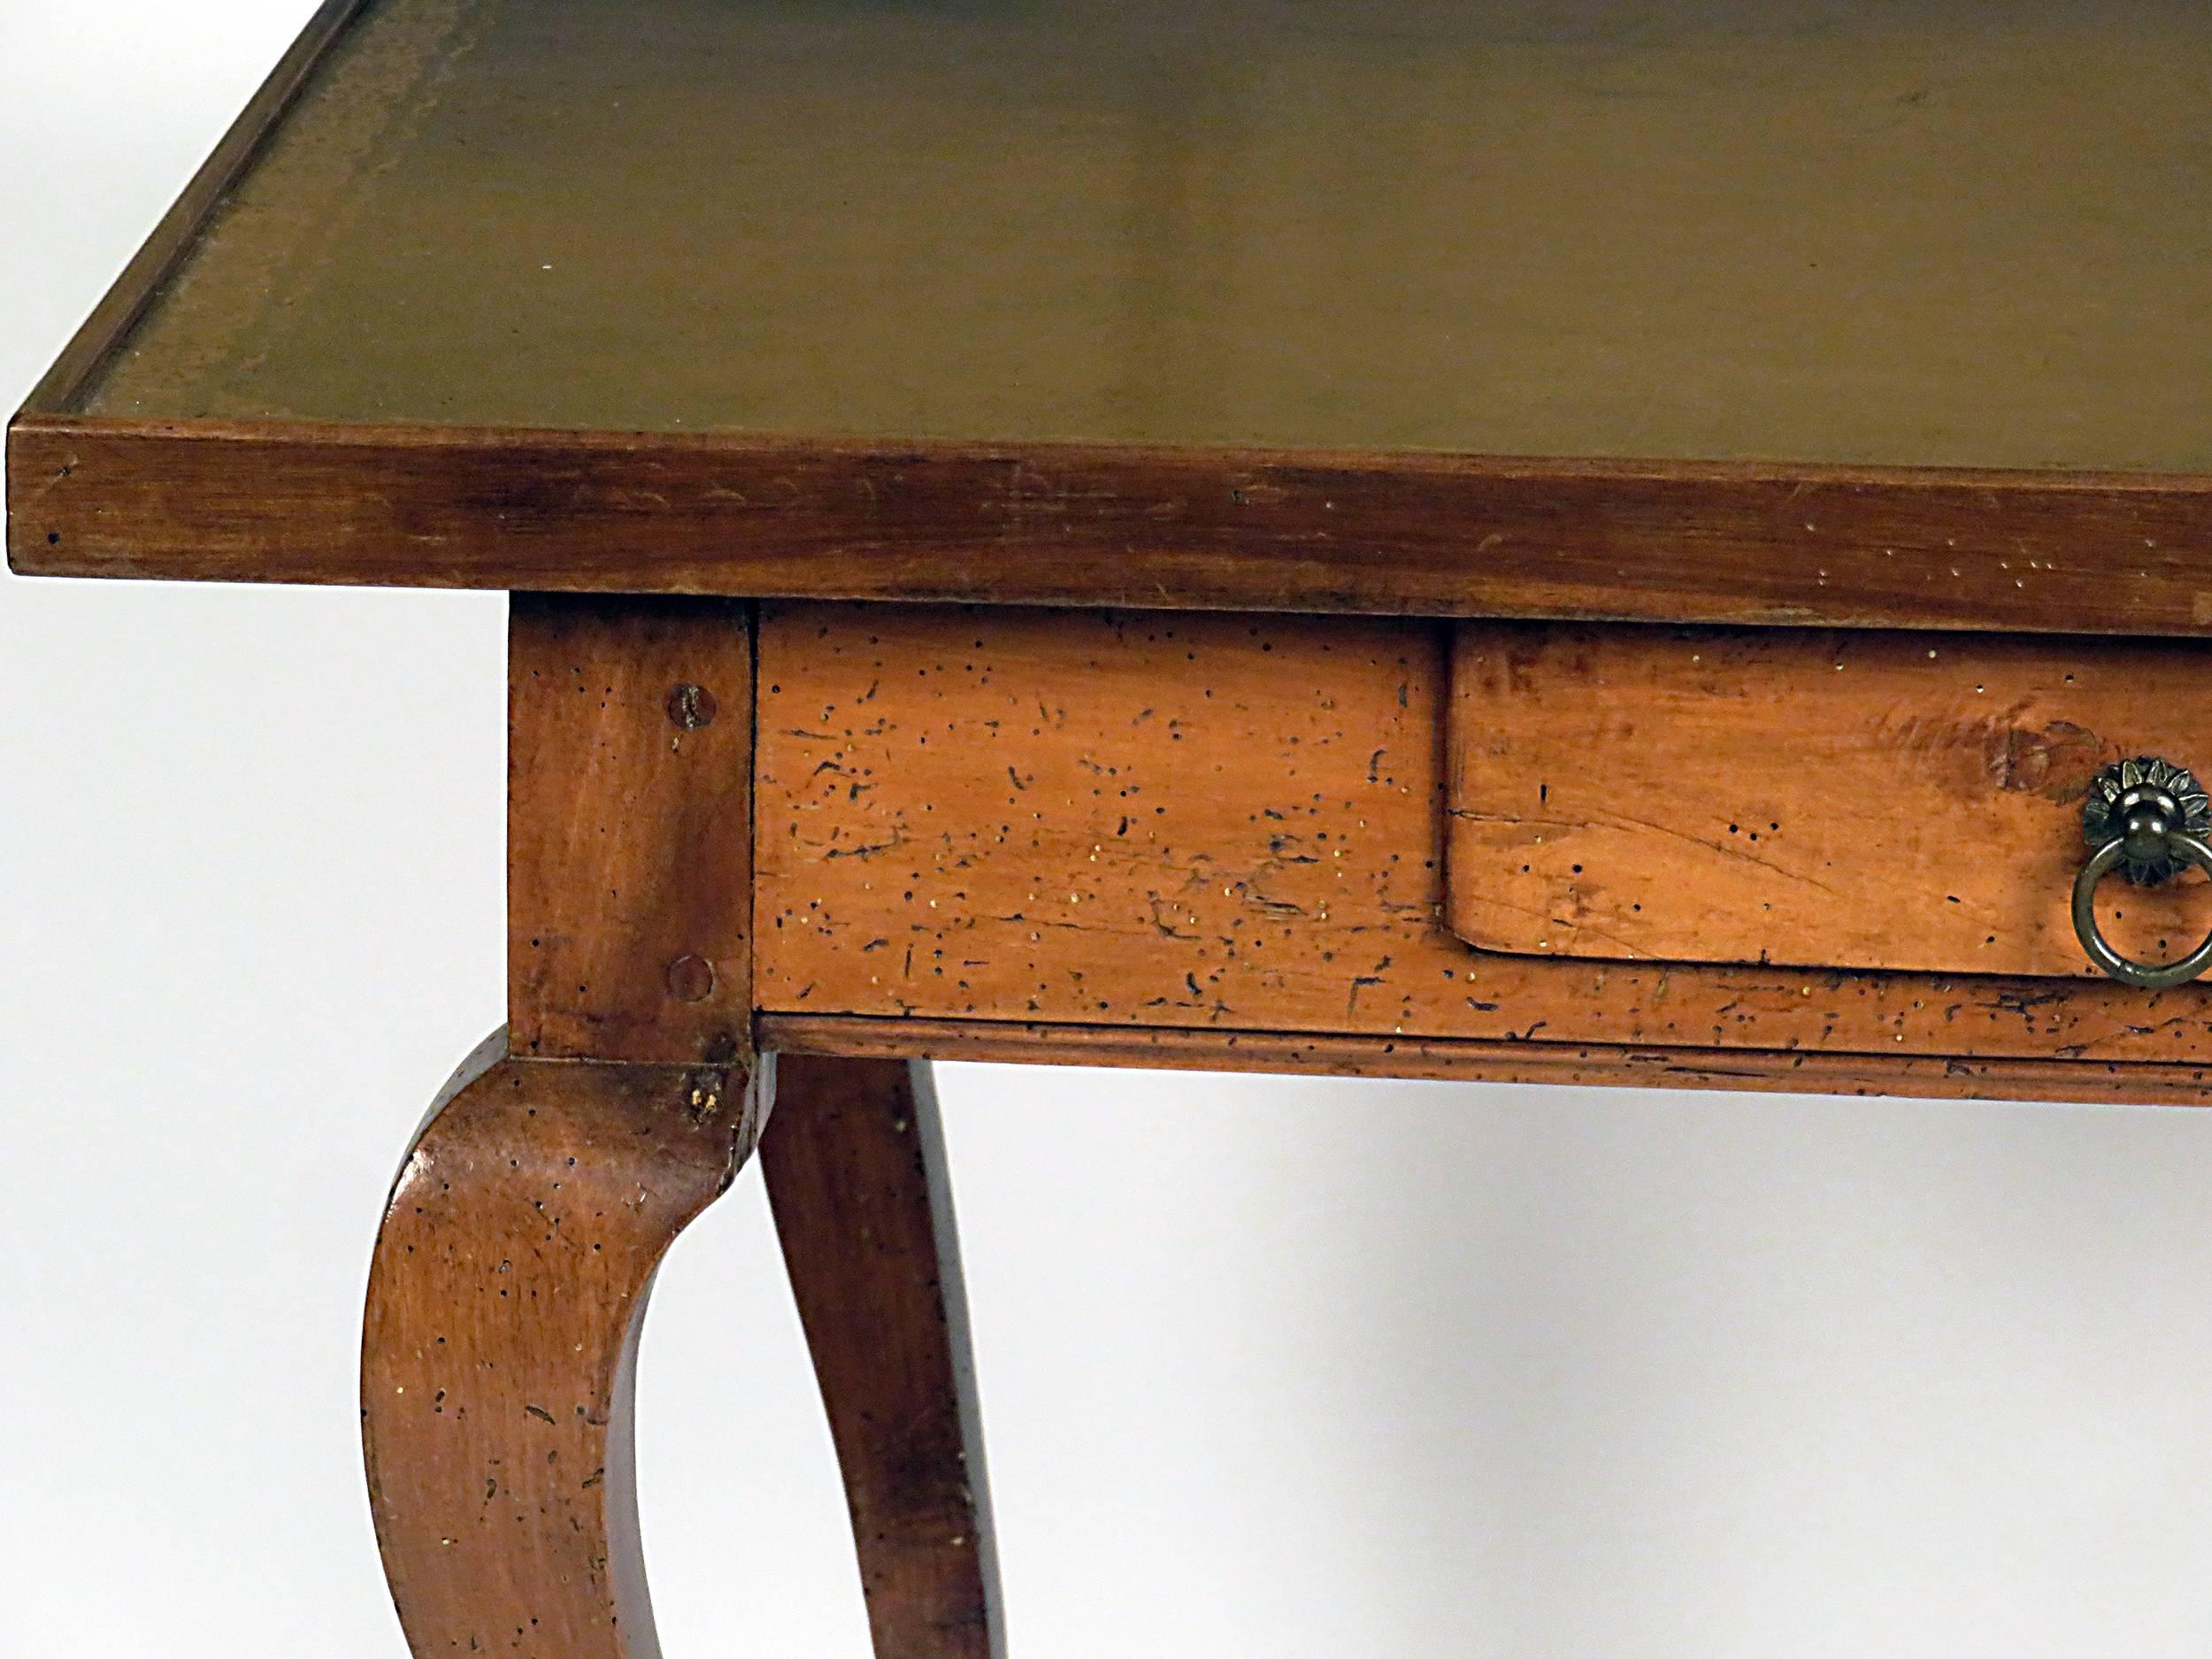 Italian leather topped walnut writing table with drawer, circa 1870. Standing on well carved cabriole legs with hoof feet. Nicely tooled and worn caramel leather top.